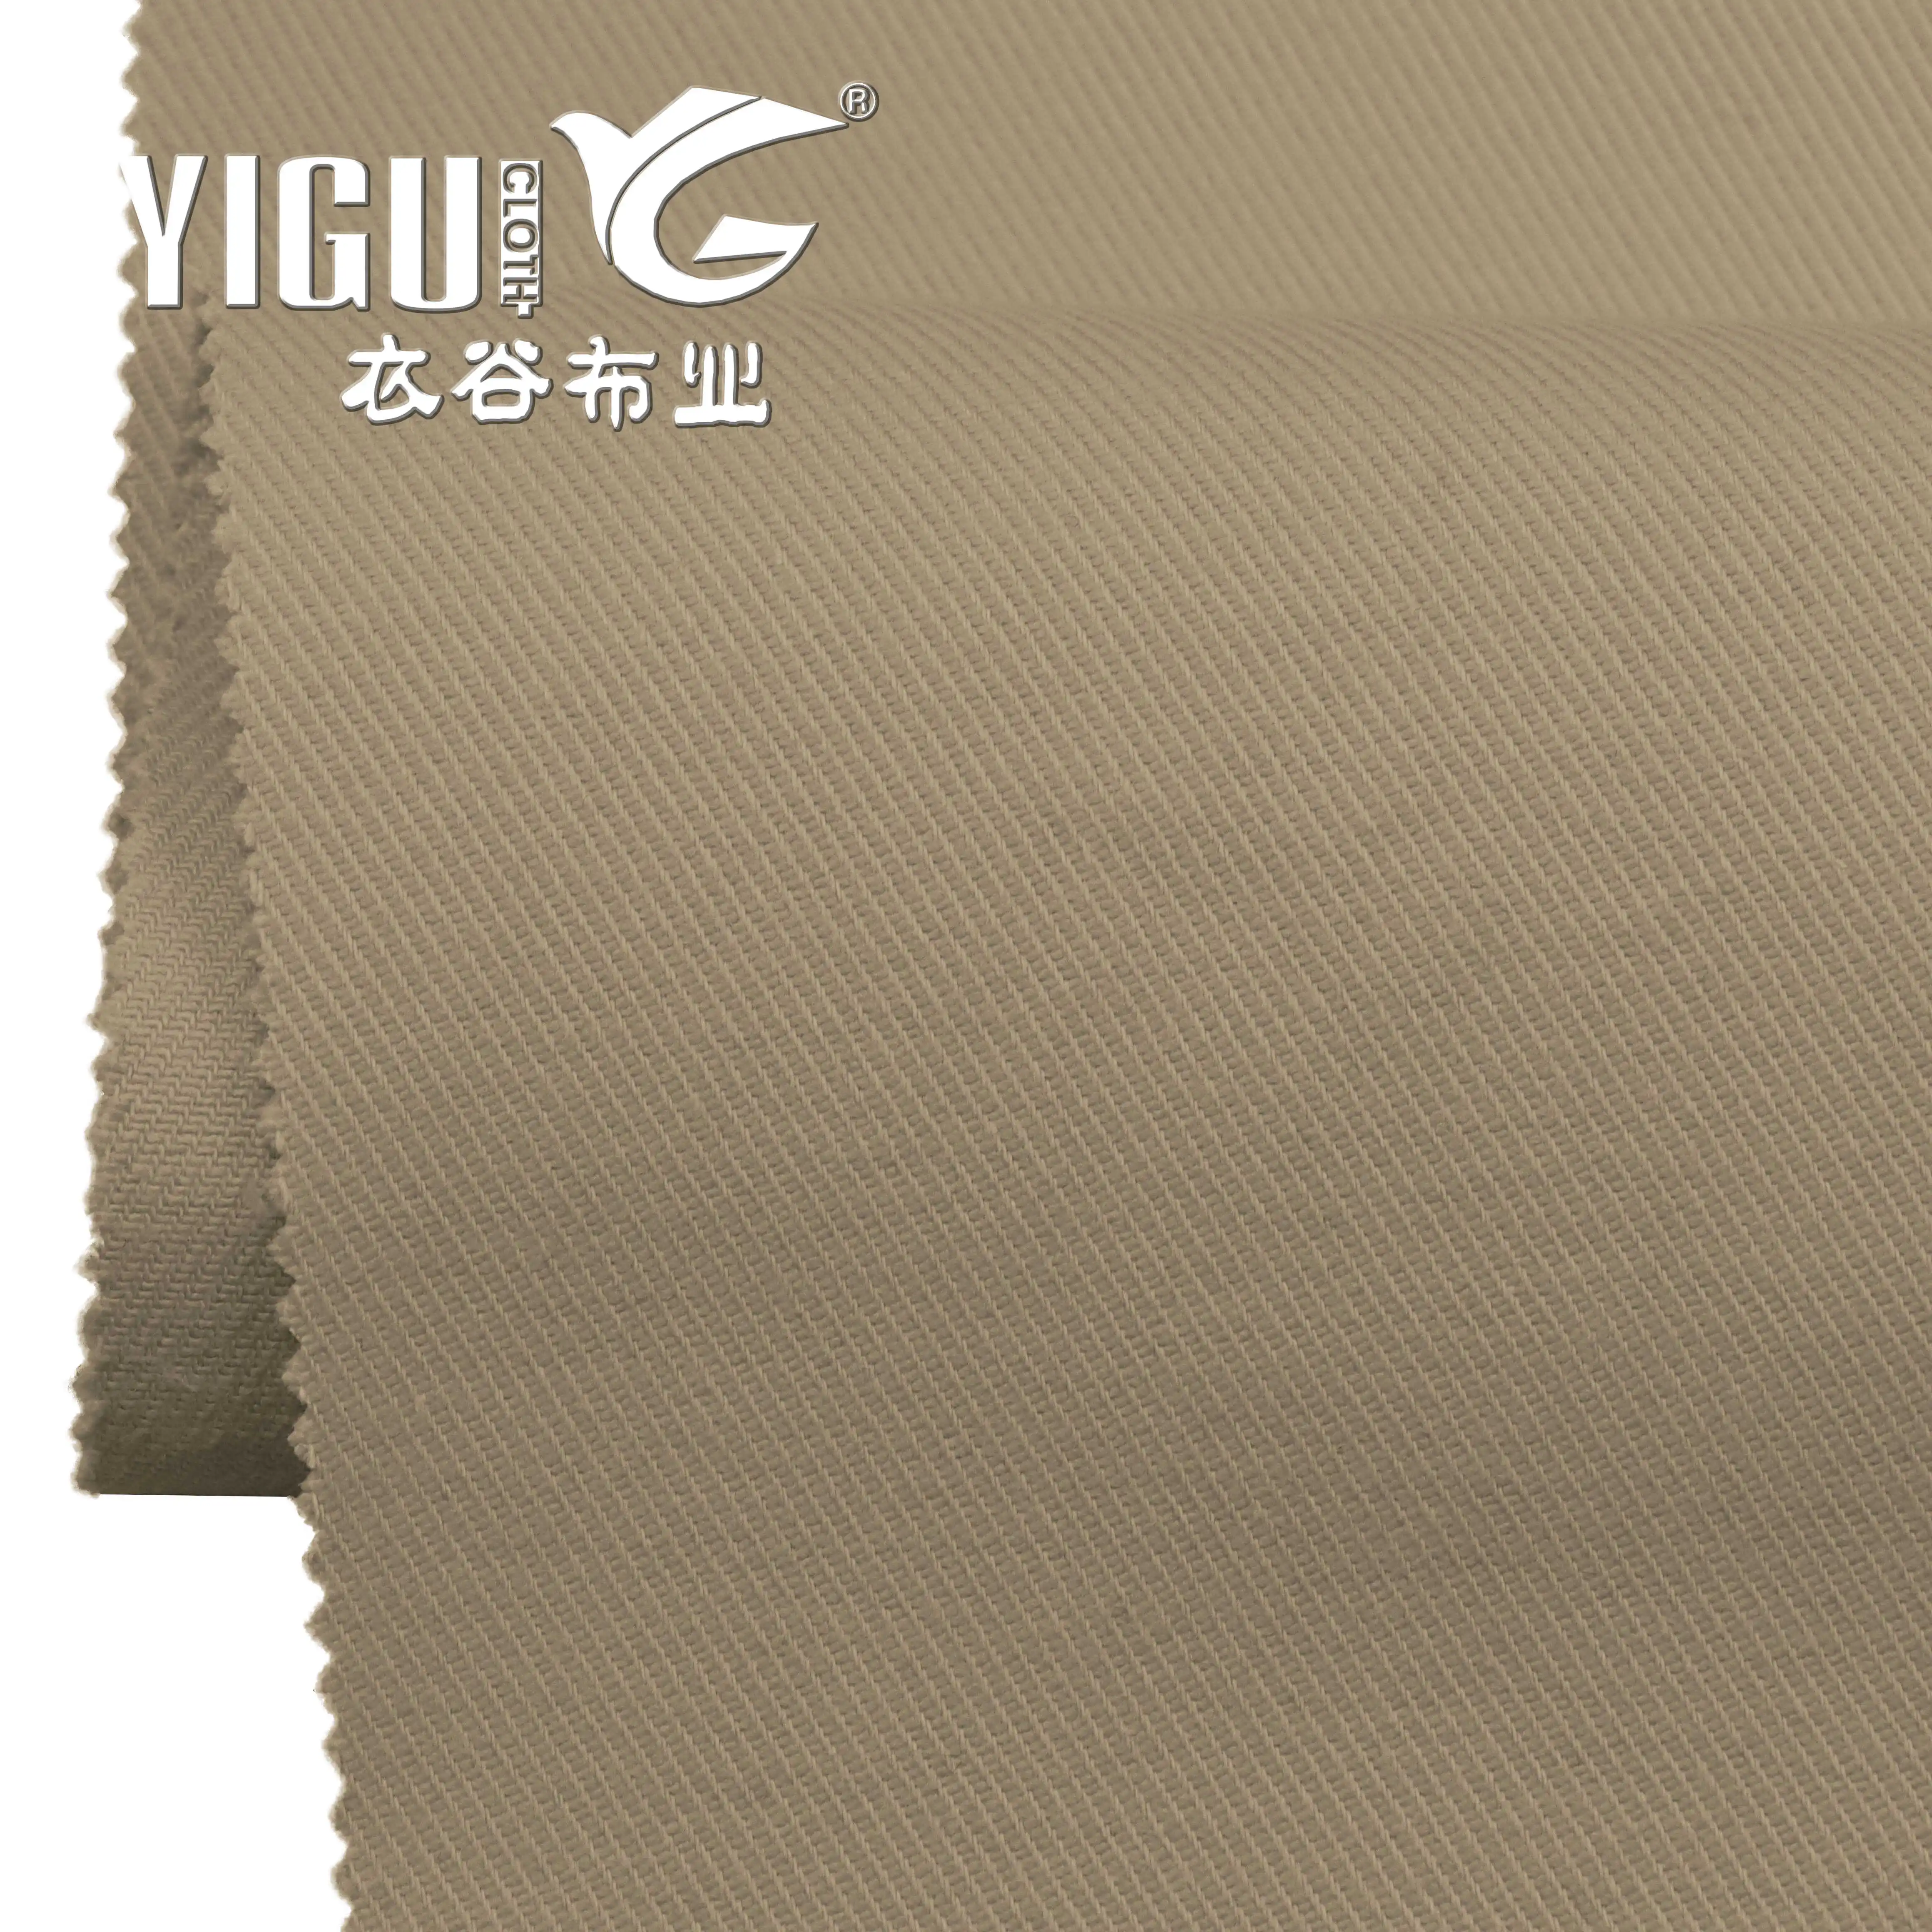 Dyed 16*12+70D 100*54 Spandex Cotton Ripstop Fabric twill cotton spandex fabric